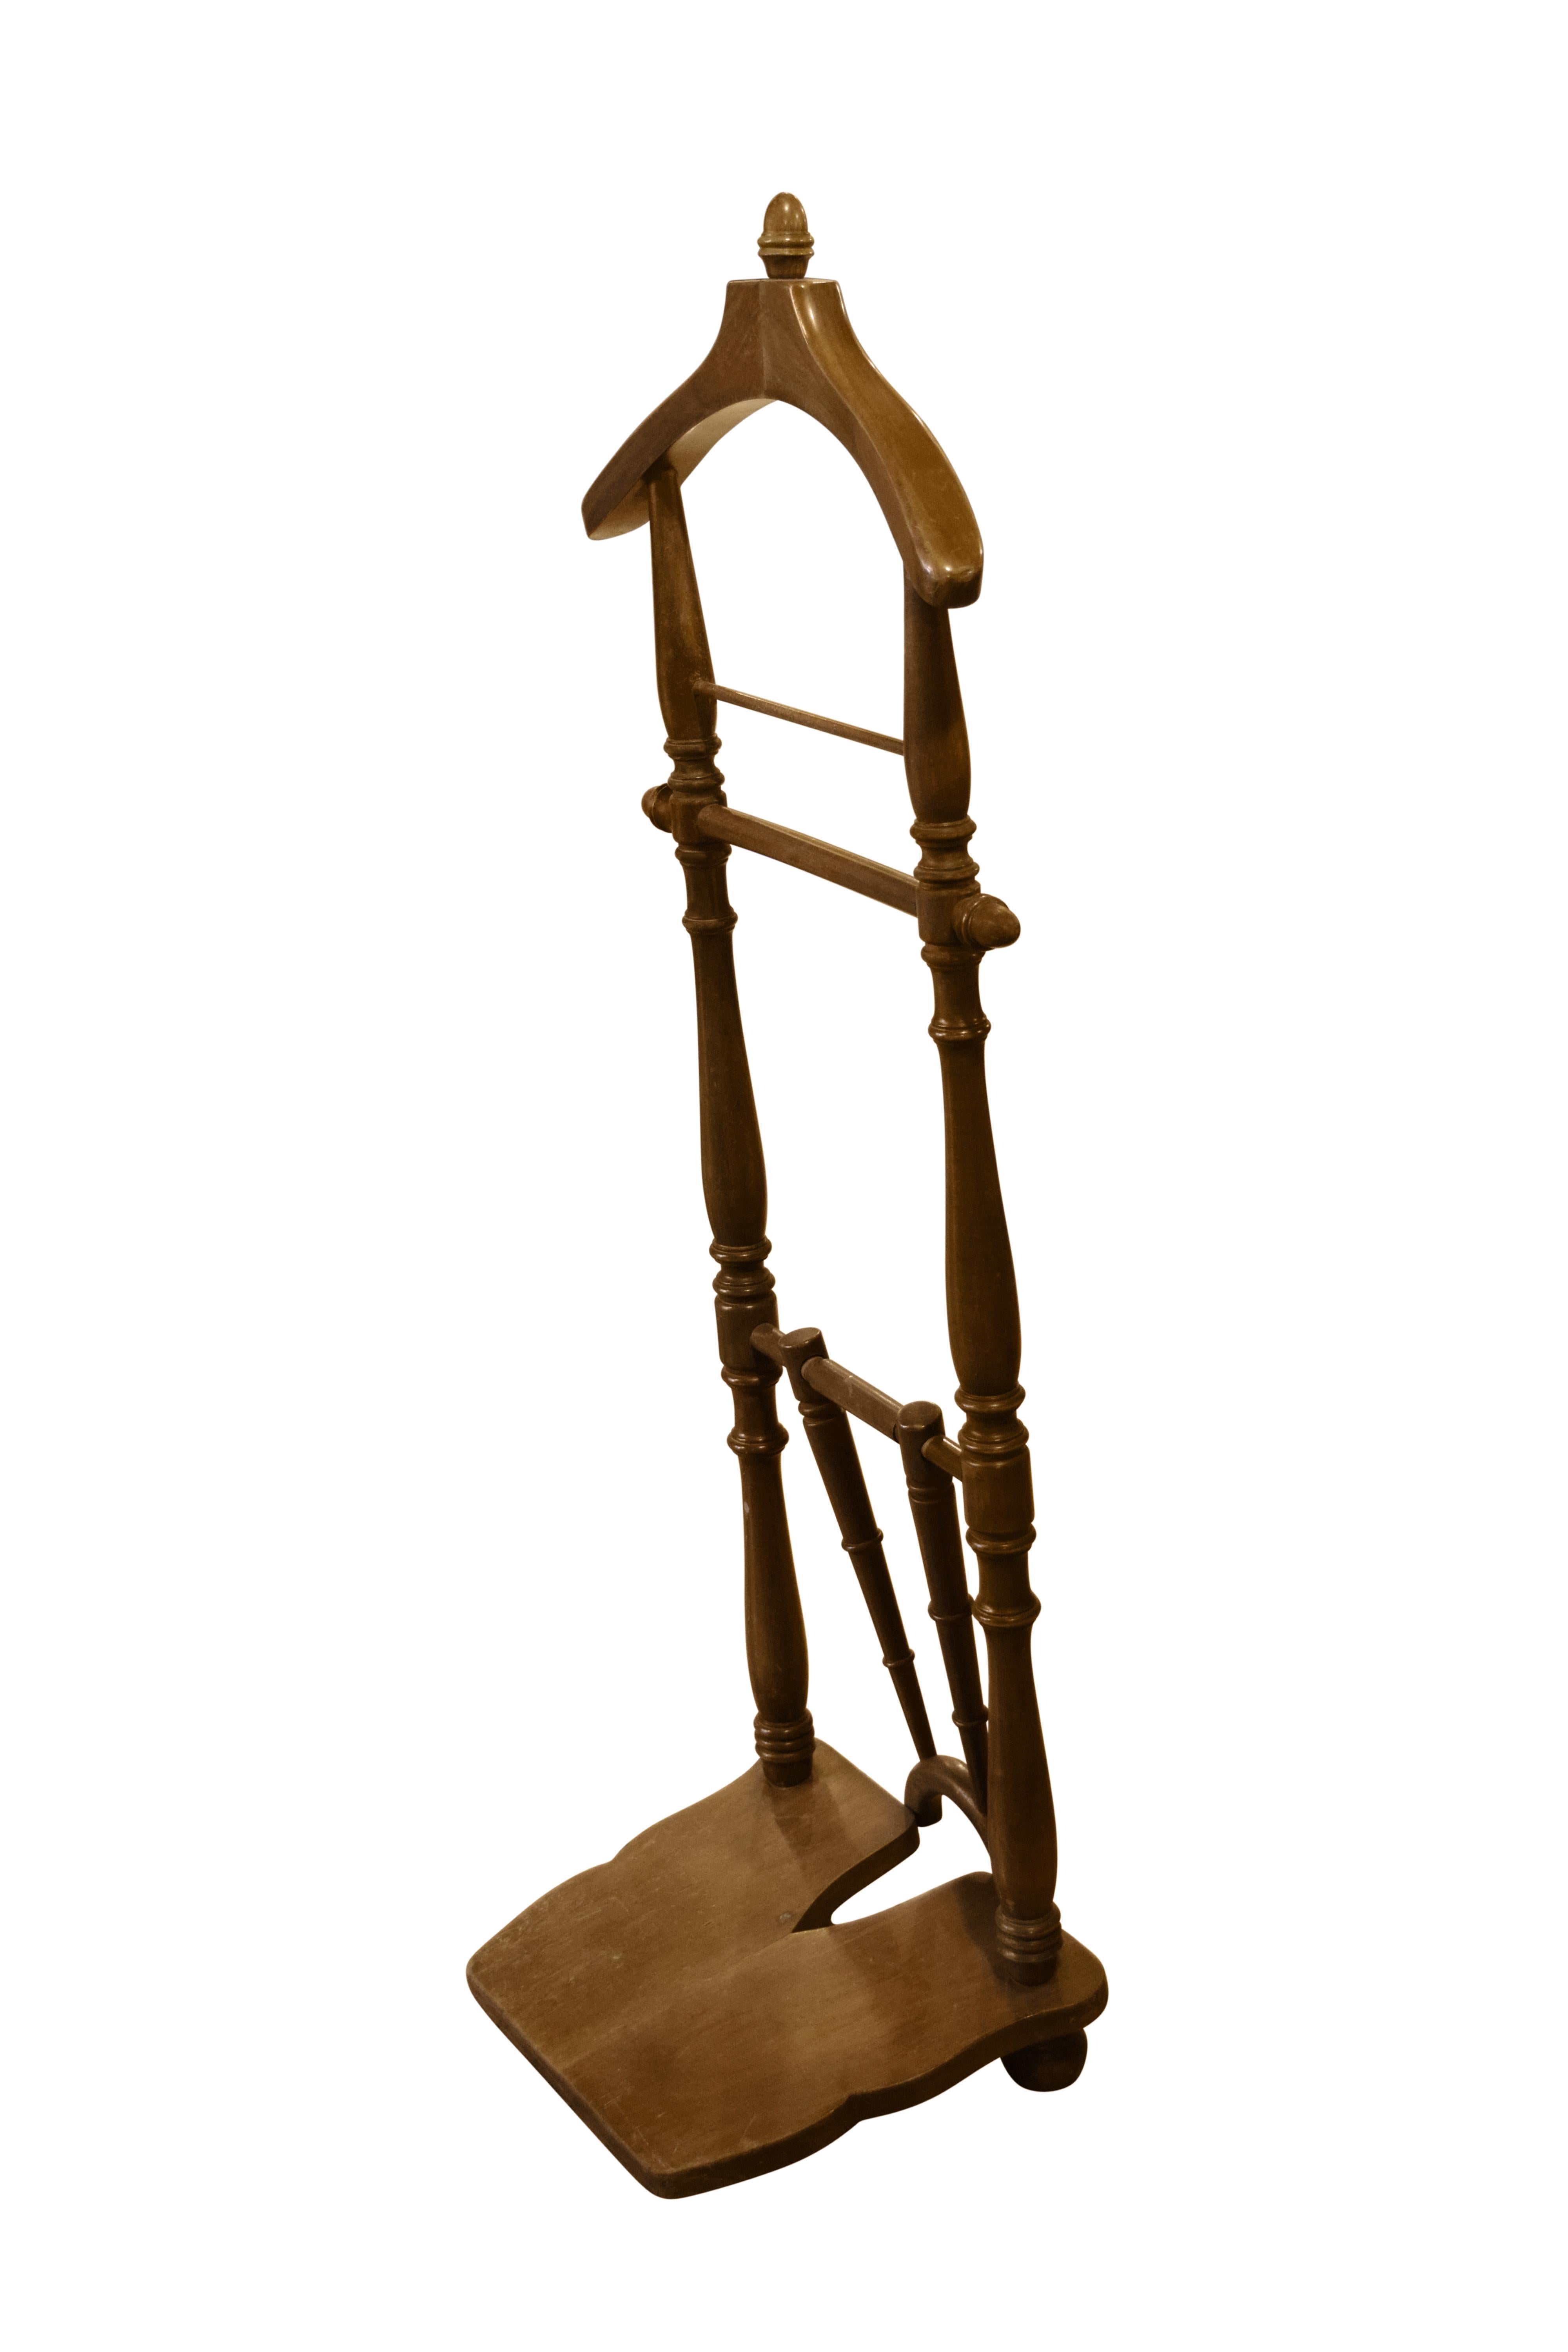 A mid-20th century Italian walnut valet stand with coat and pant hanger and a boot jack.